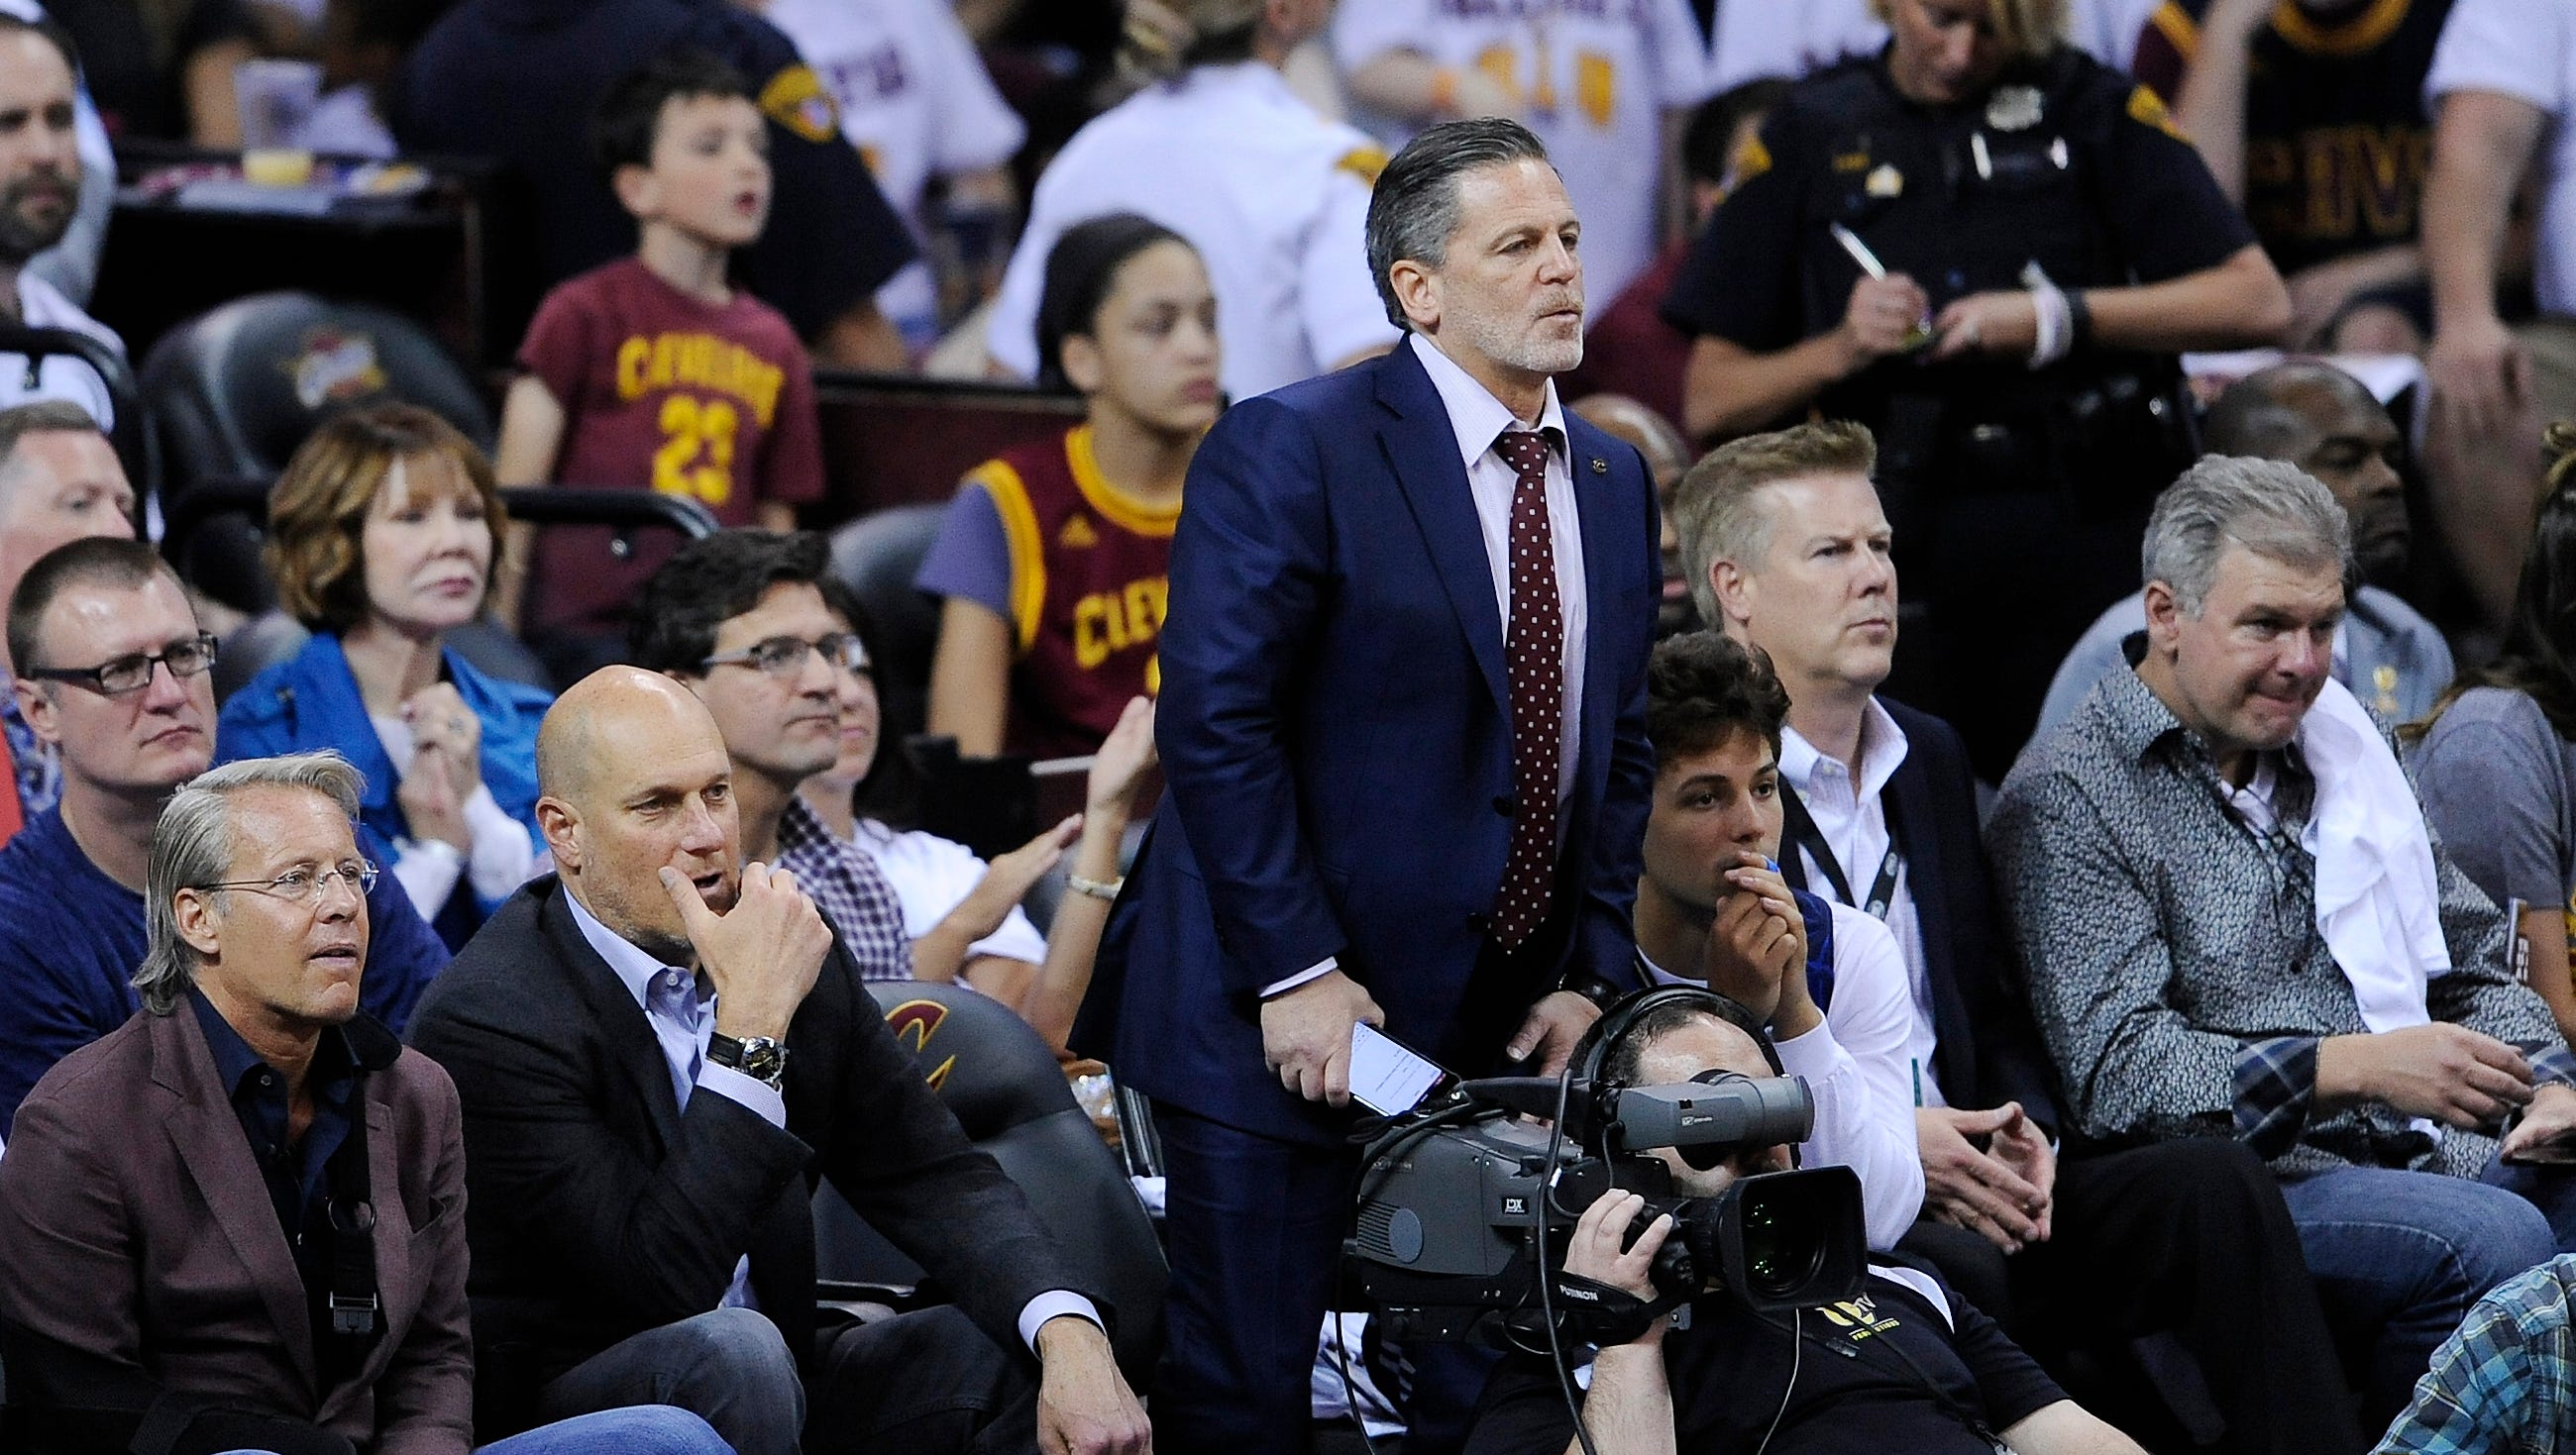 Cavaliers owner Dan Gilbert stands to watch his team in the fourth quarter.